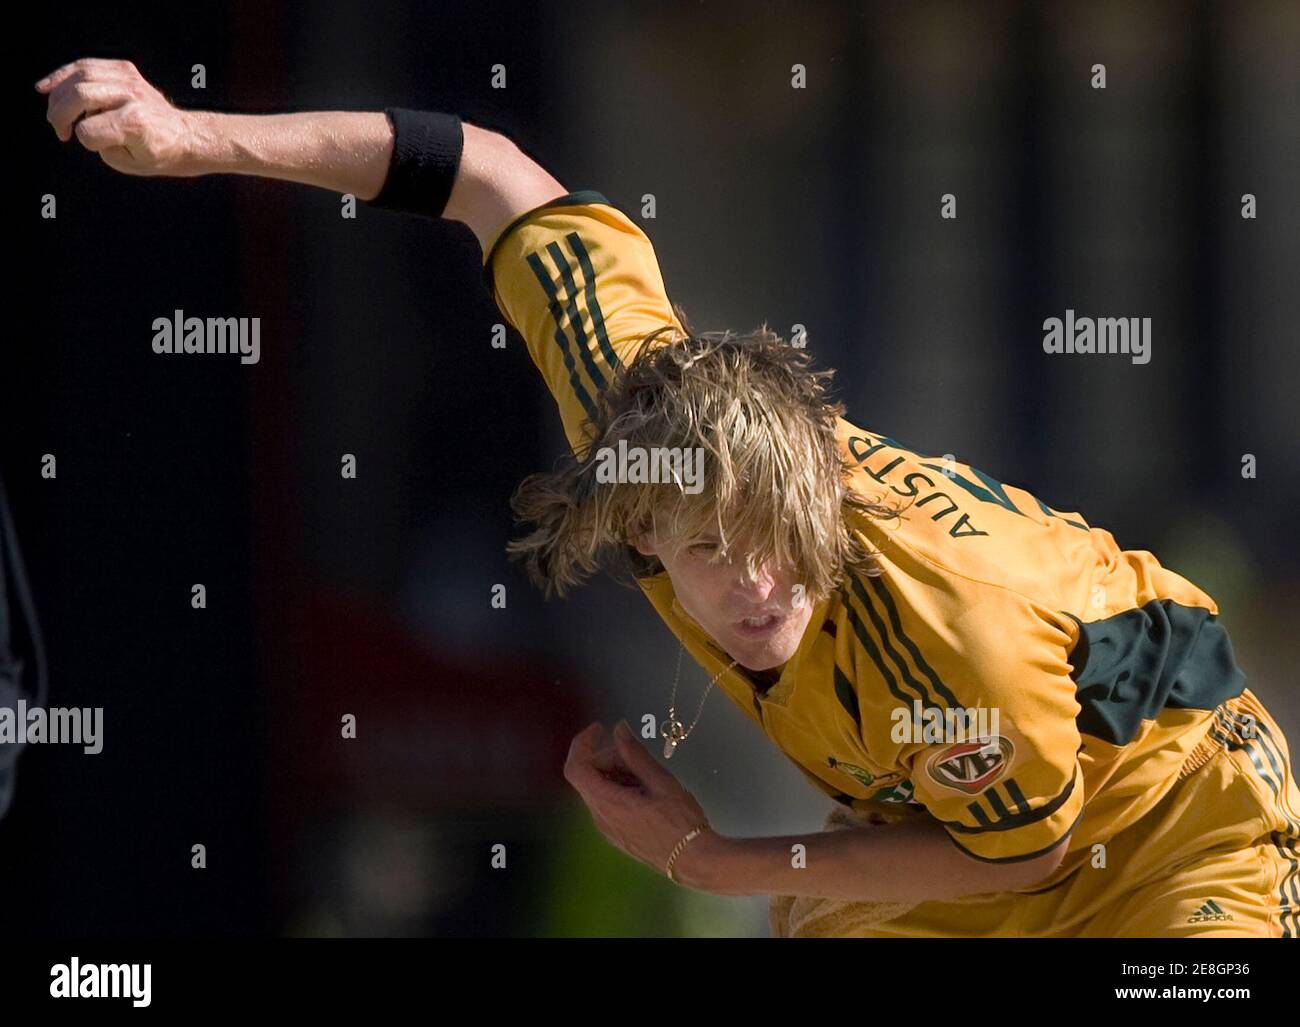 Australia's Nathan Bracken bowls against West Indies during their fourth one-day international cricket match in Basseterre, St. Kitts July 4, 2008.       REUTERS/Andy Clark        (ST KITTS) Stock Photo